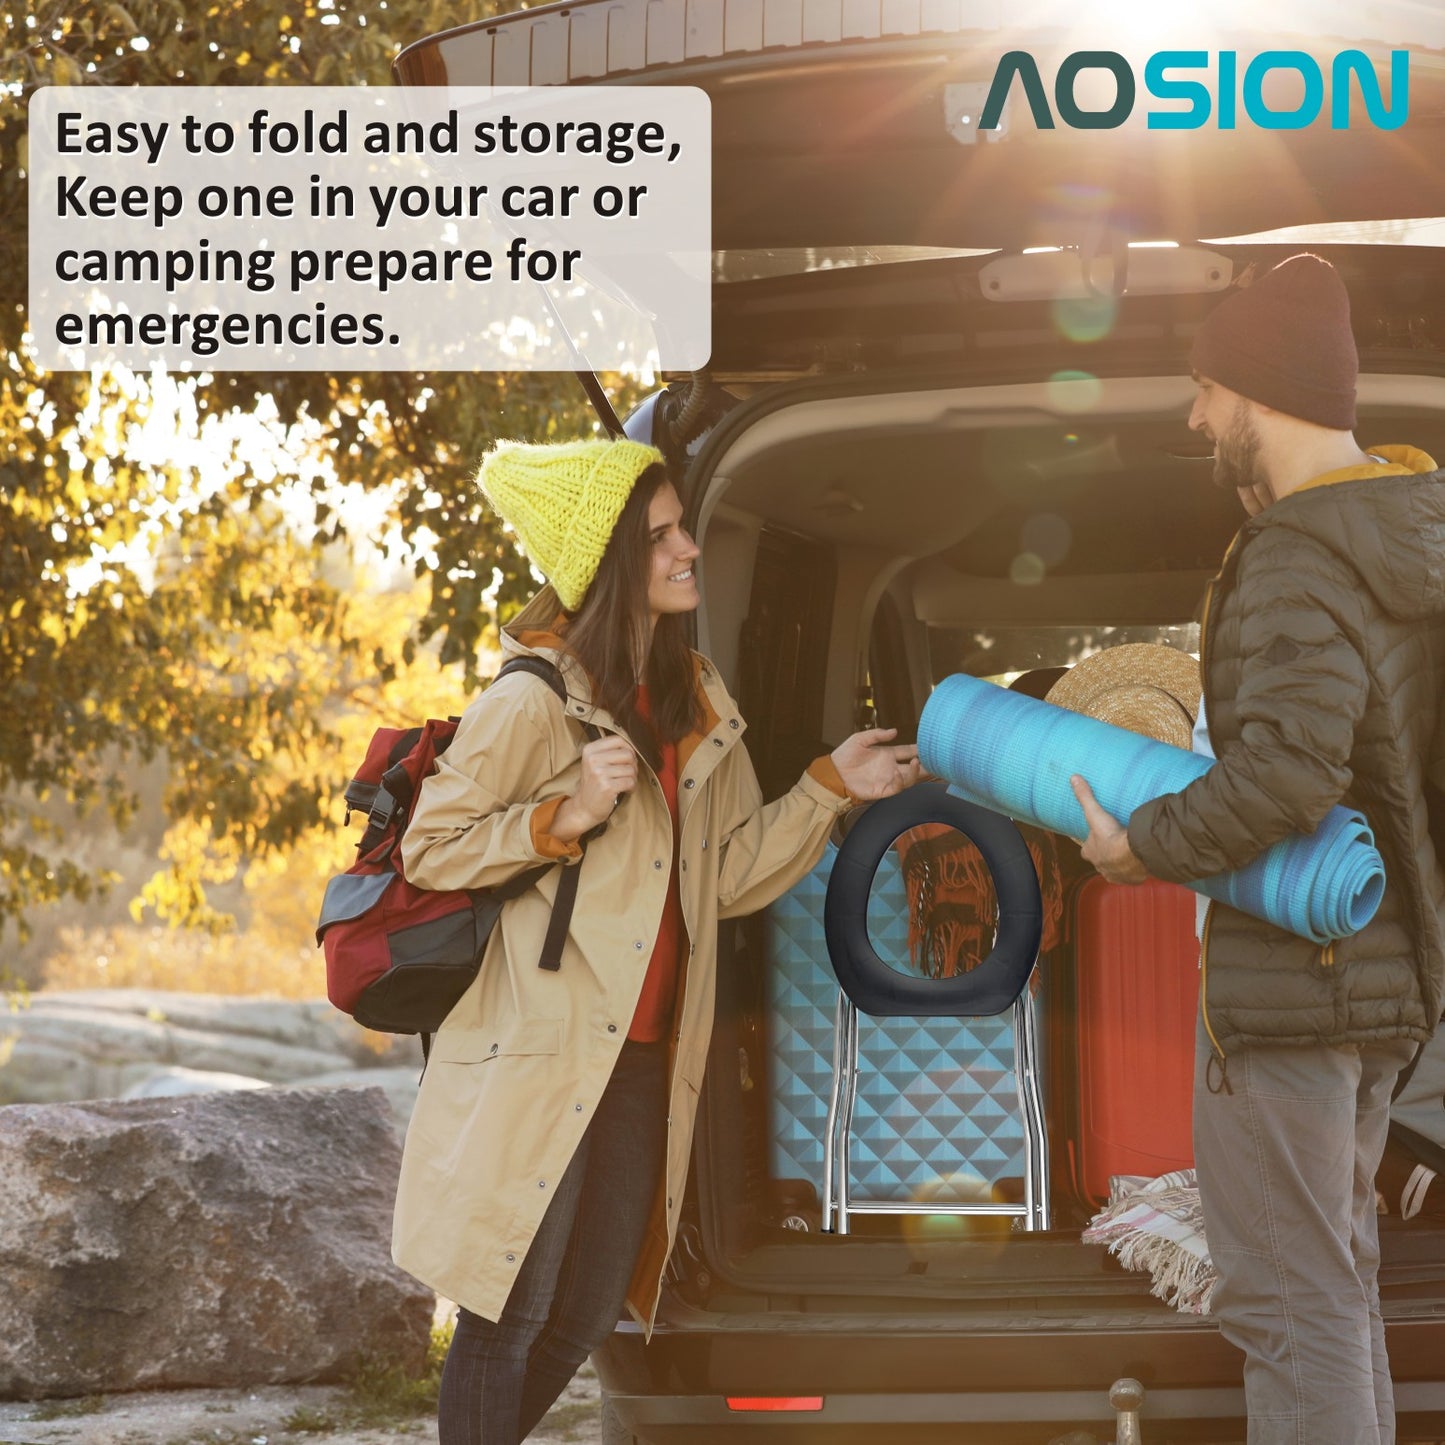 AOSION Portable Toilet for Camping